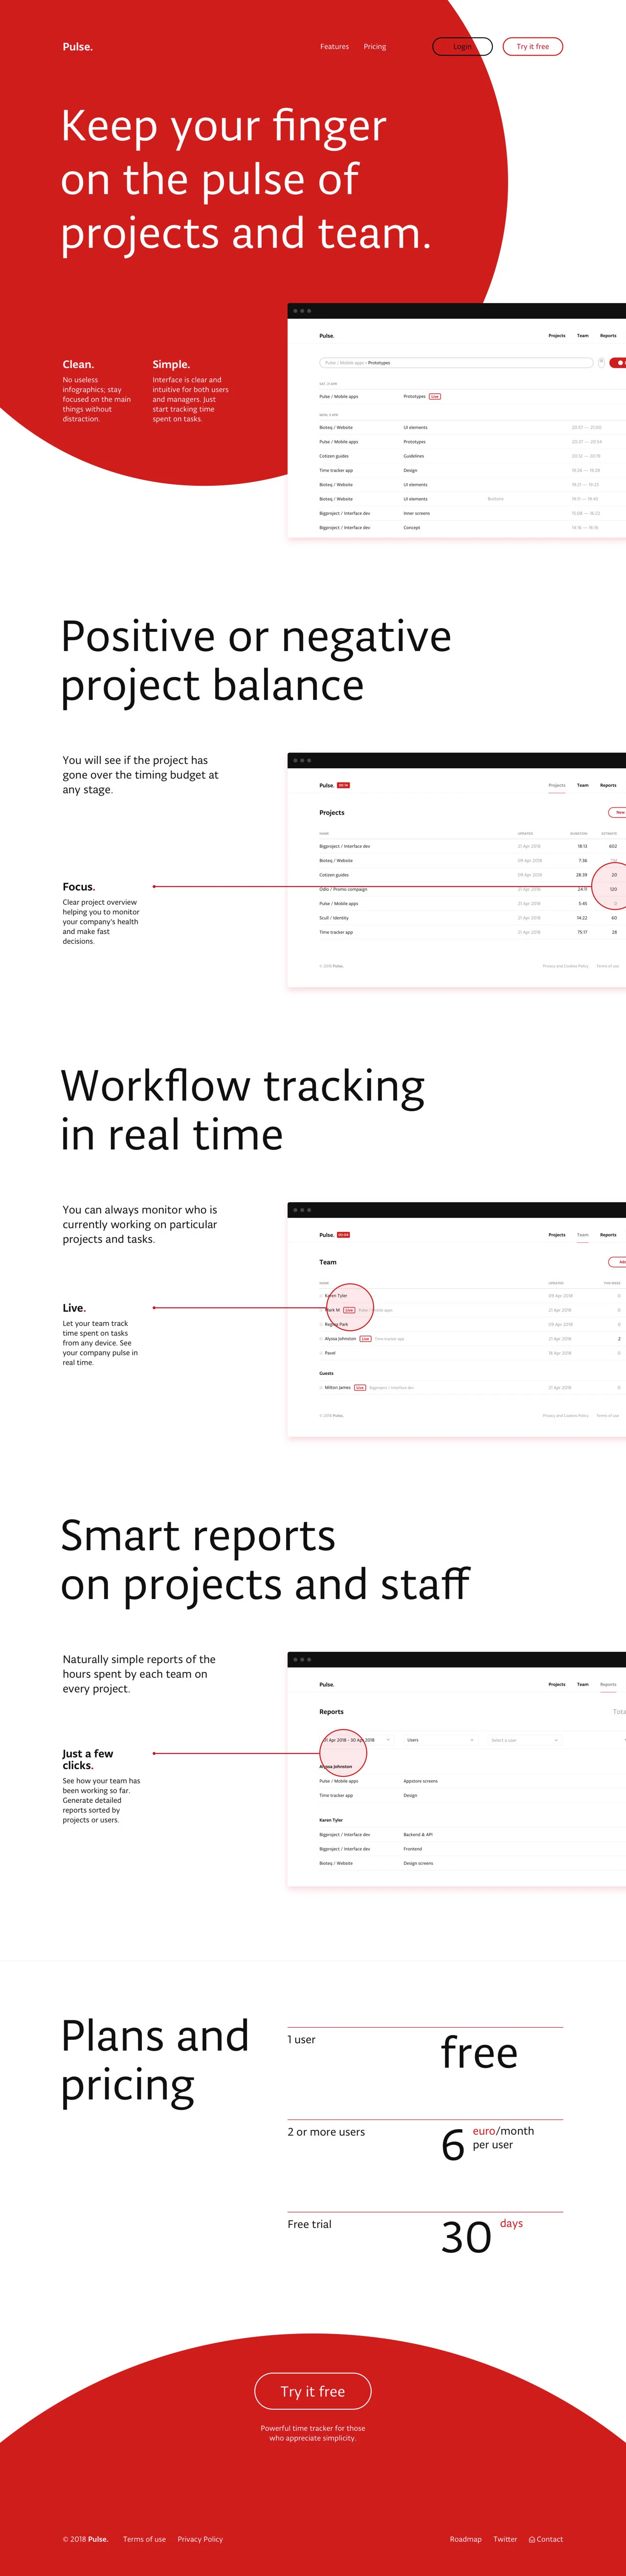 Pulse.red Landing Page Example: Powerful time tracker for those who appriciate simplicity. No useless infographics; stay focused on the main things.